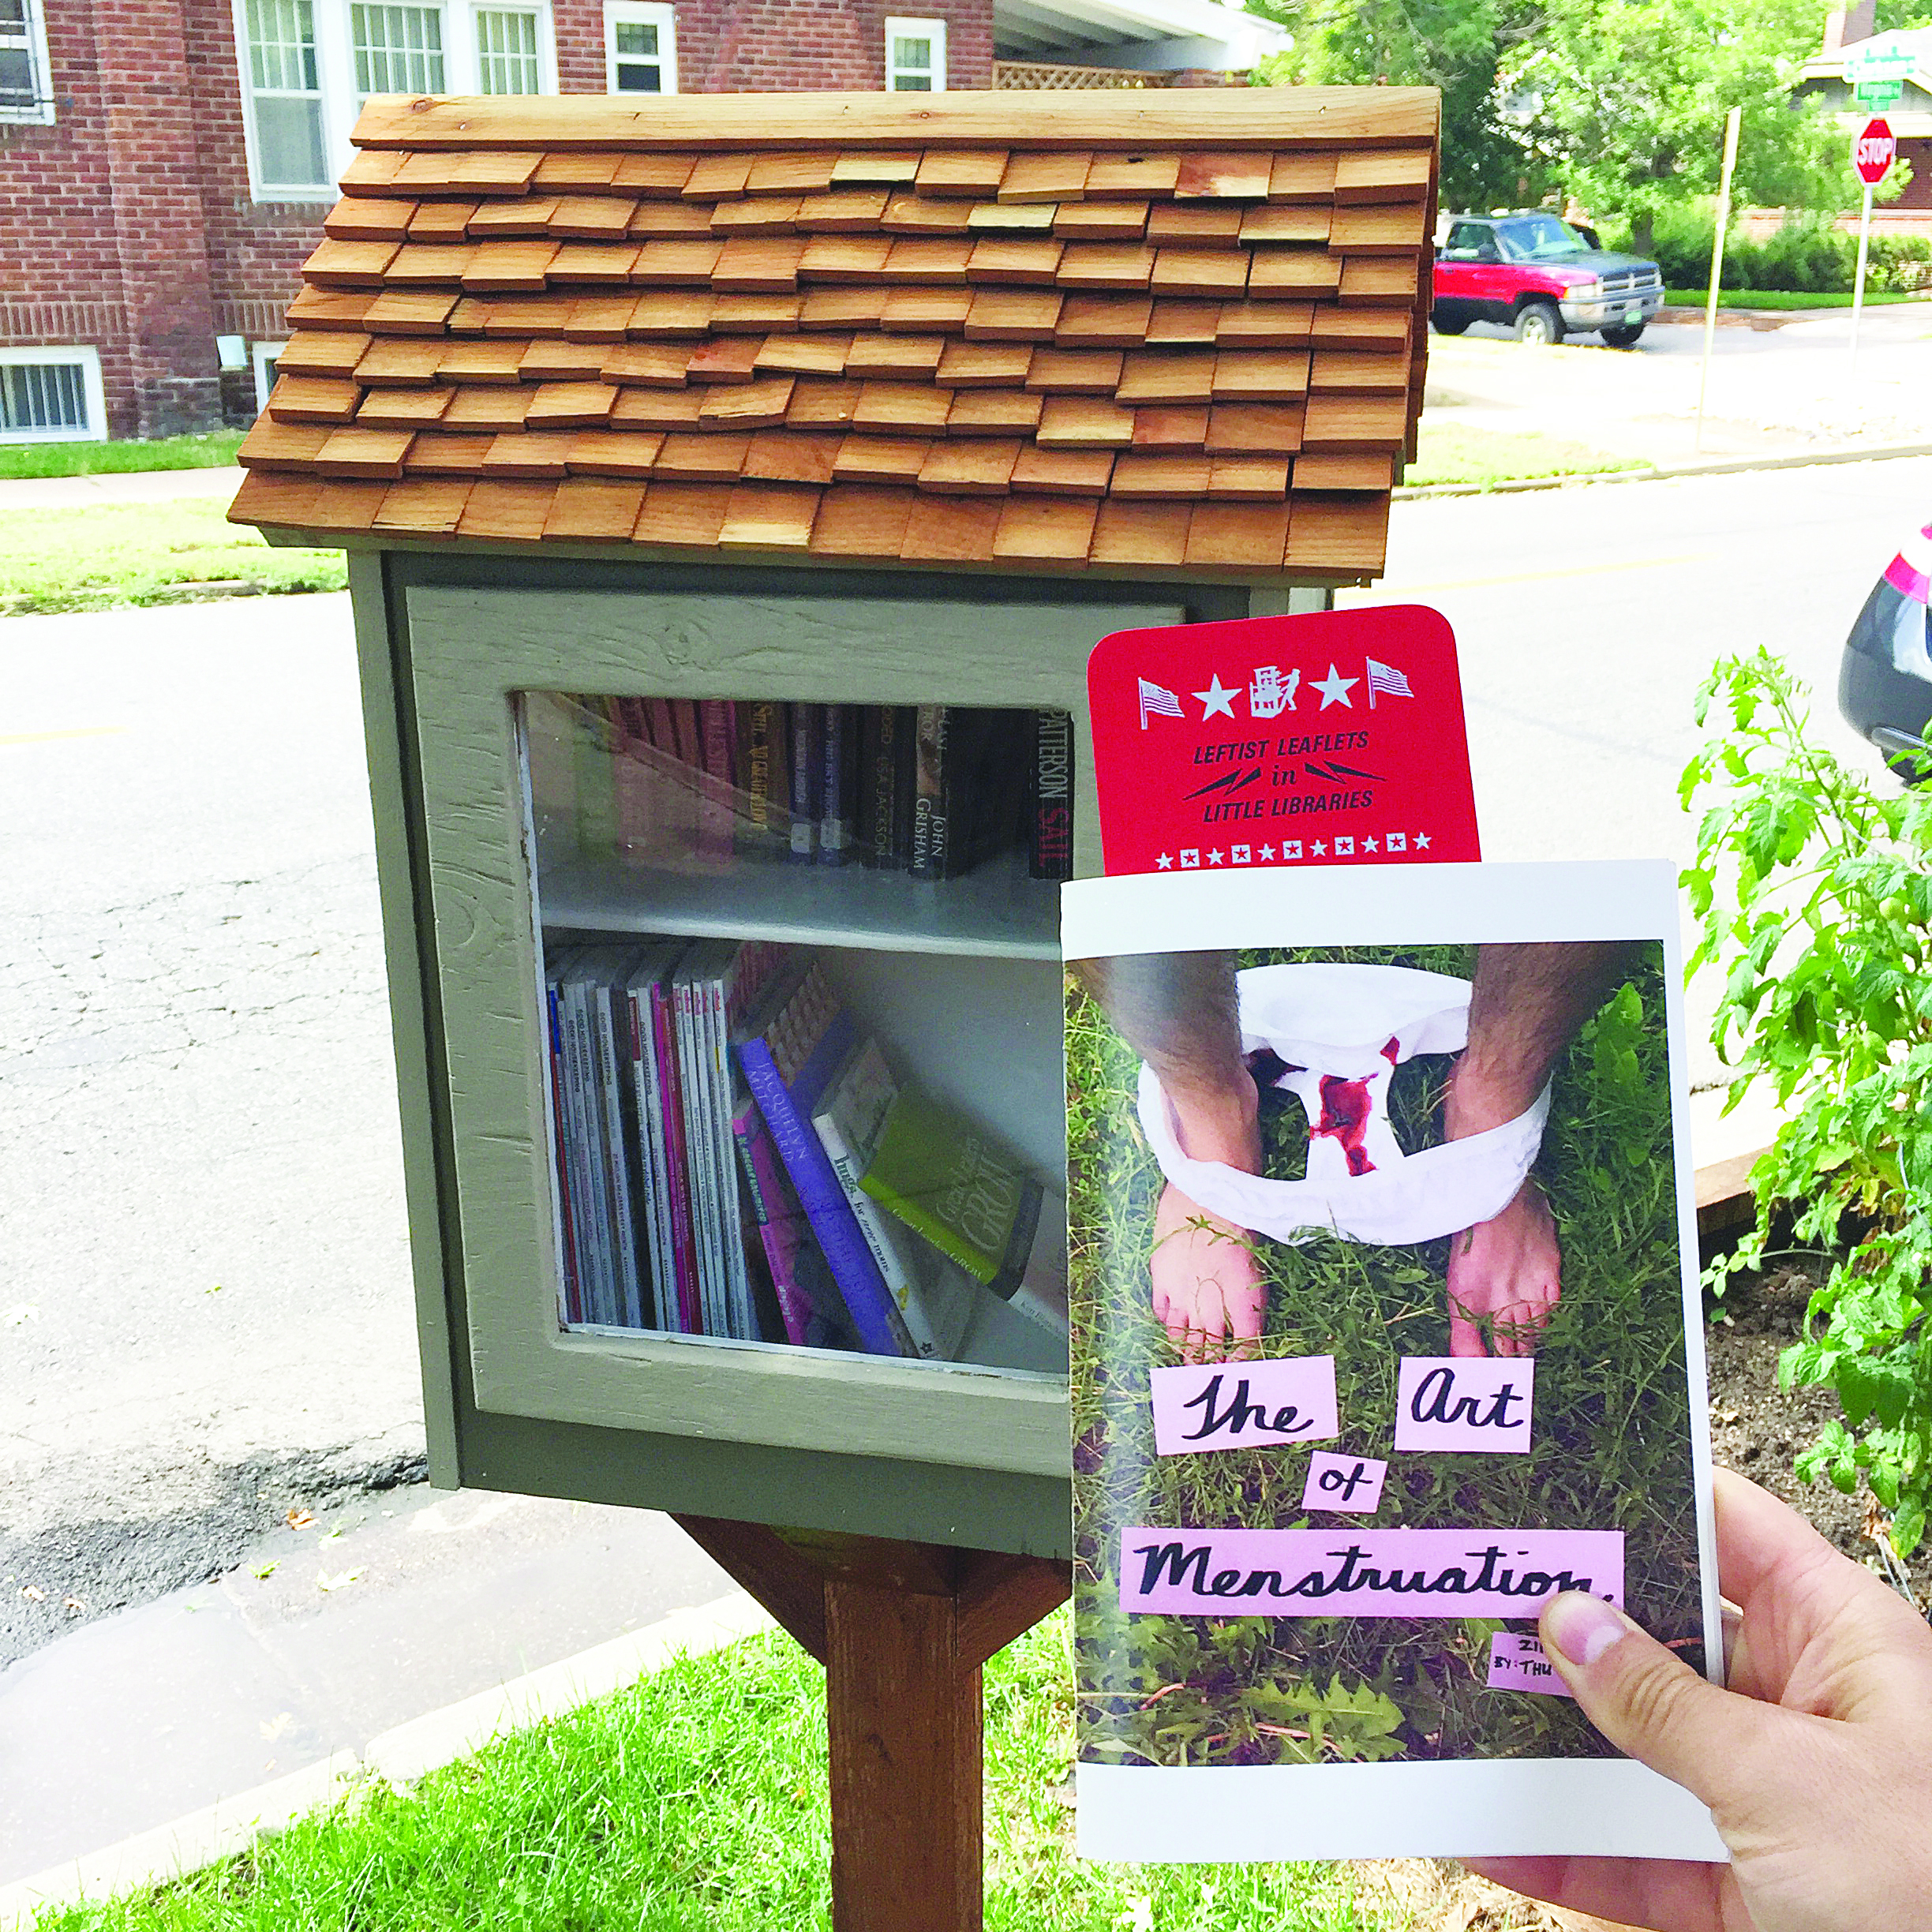 A small library in the shape of a house with booklets inside. There is a hand holding a zine that says "The art of menstruation."